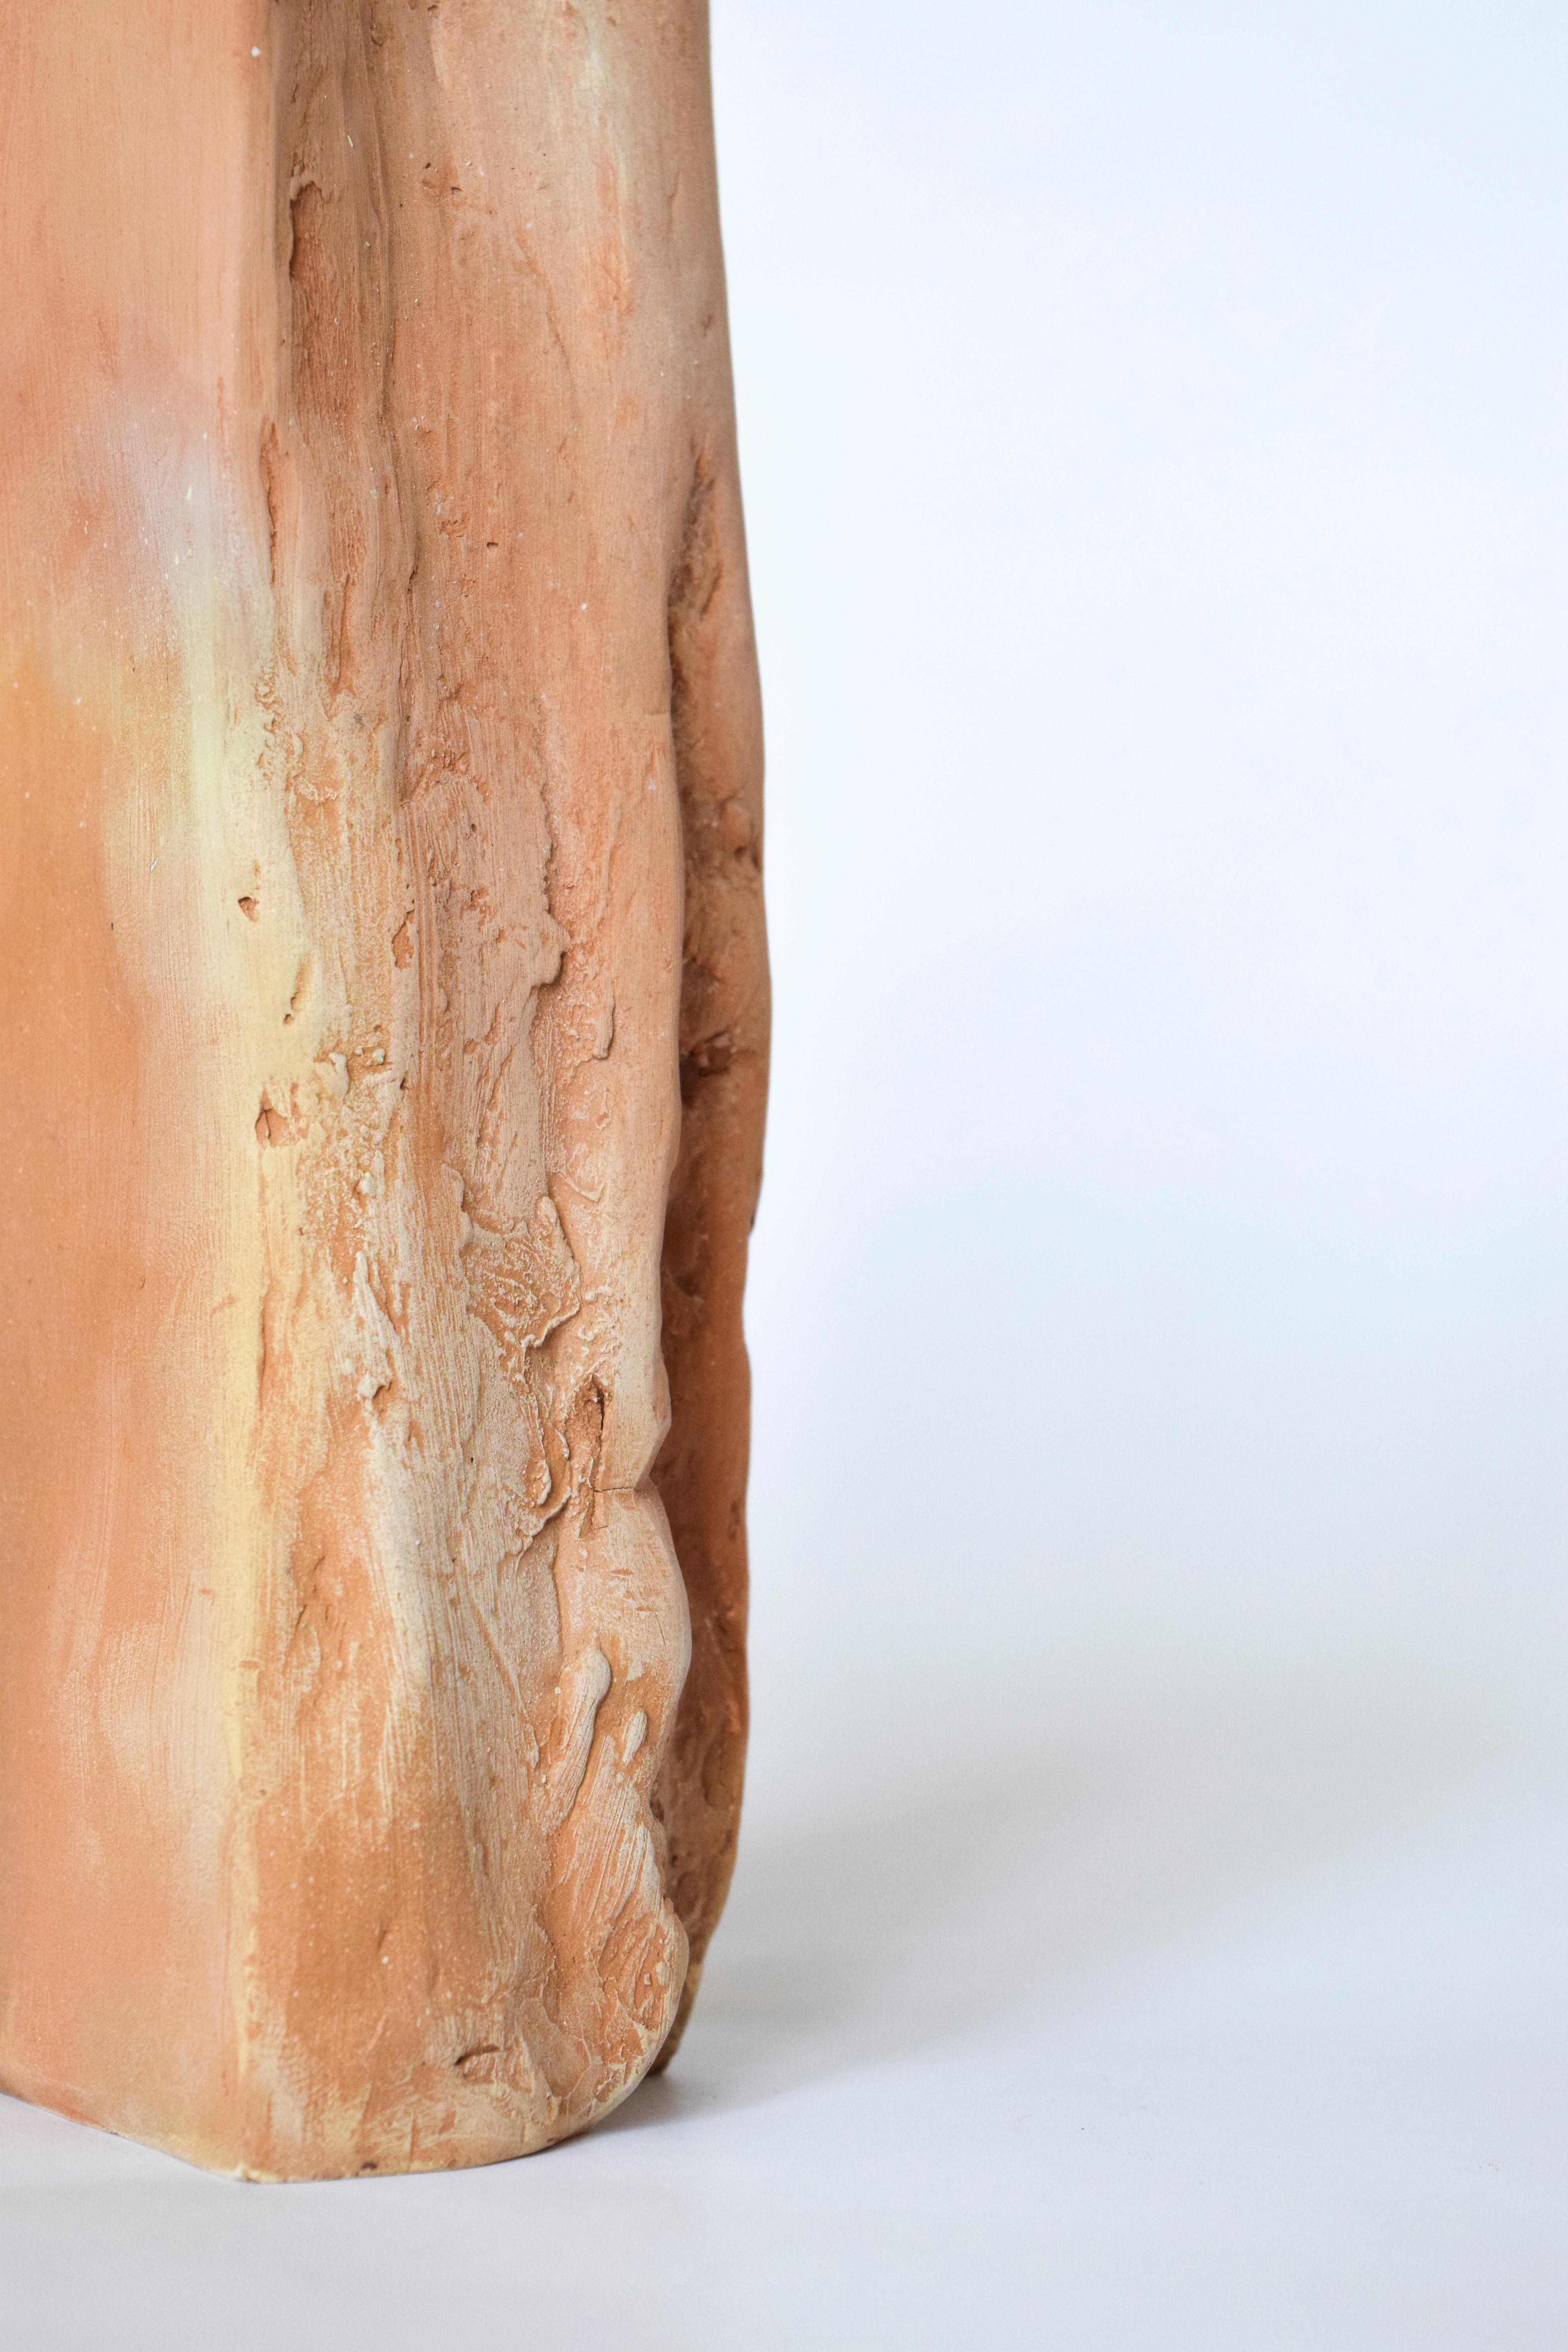 Orgametry - Unique organic vase, Aurore
Measures: 17 x 5.5 x 5 cm

Orgametry is the meeting of human geometric design and natural raw shapes in unique and fine pieces through neo molding technique. 
- from sediments of the project based area